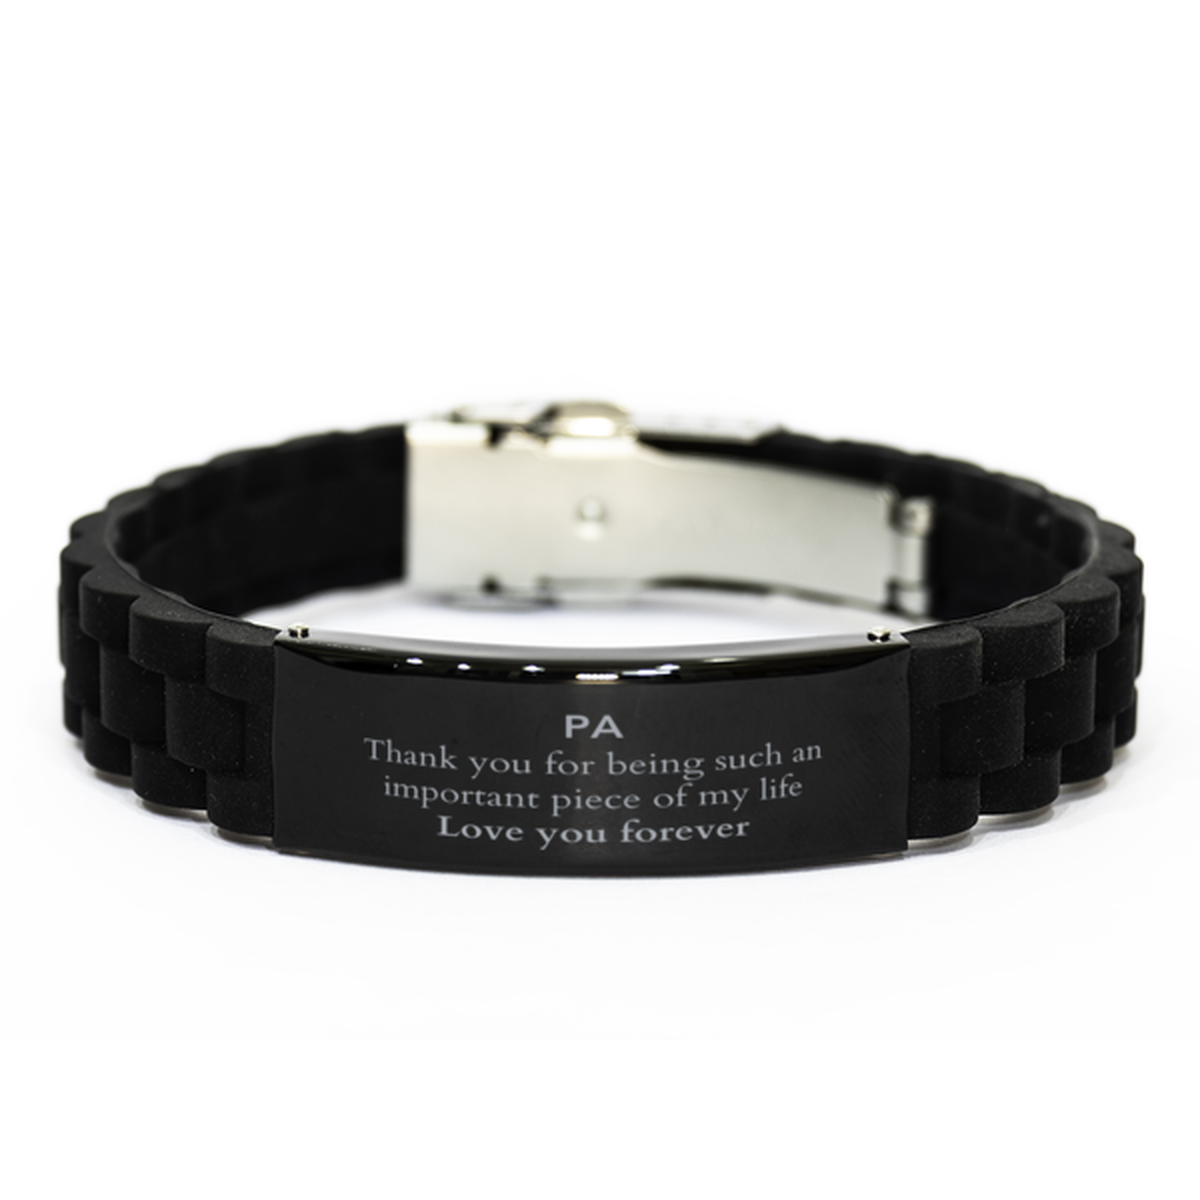 Appropriate Pa Black Glidelock Clasp Bracelet Epic Birthday Gifts for Pa Thank you for being such an important piece of my life Pa Christmas Mothers Fathers Day